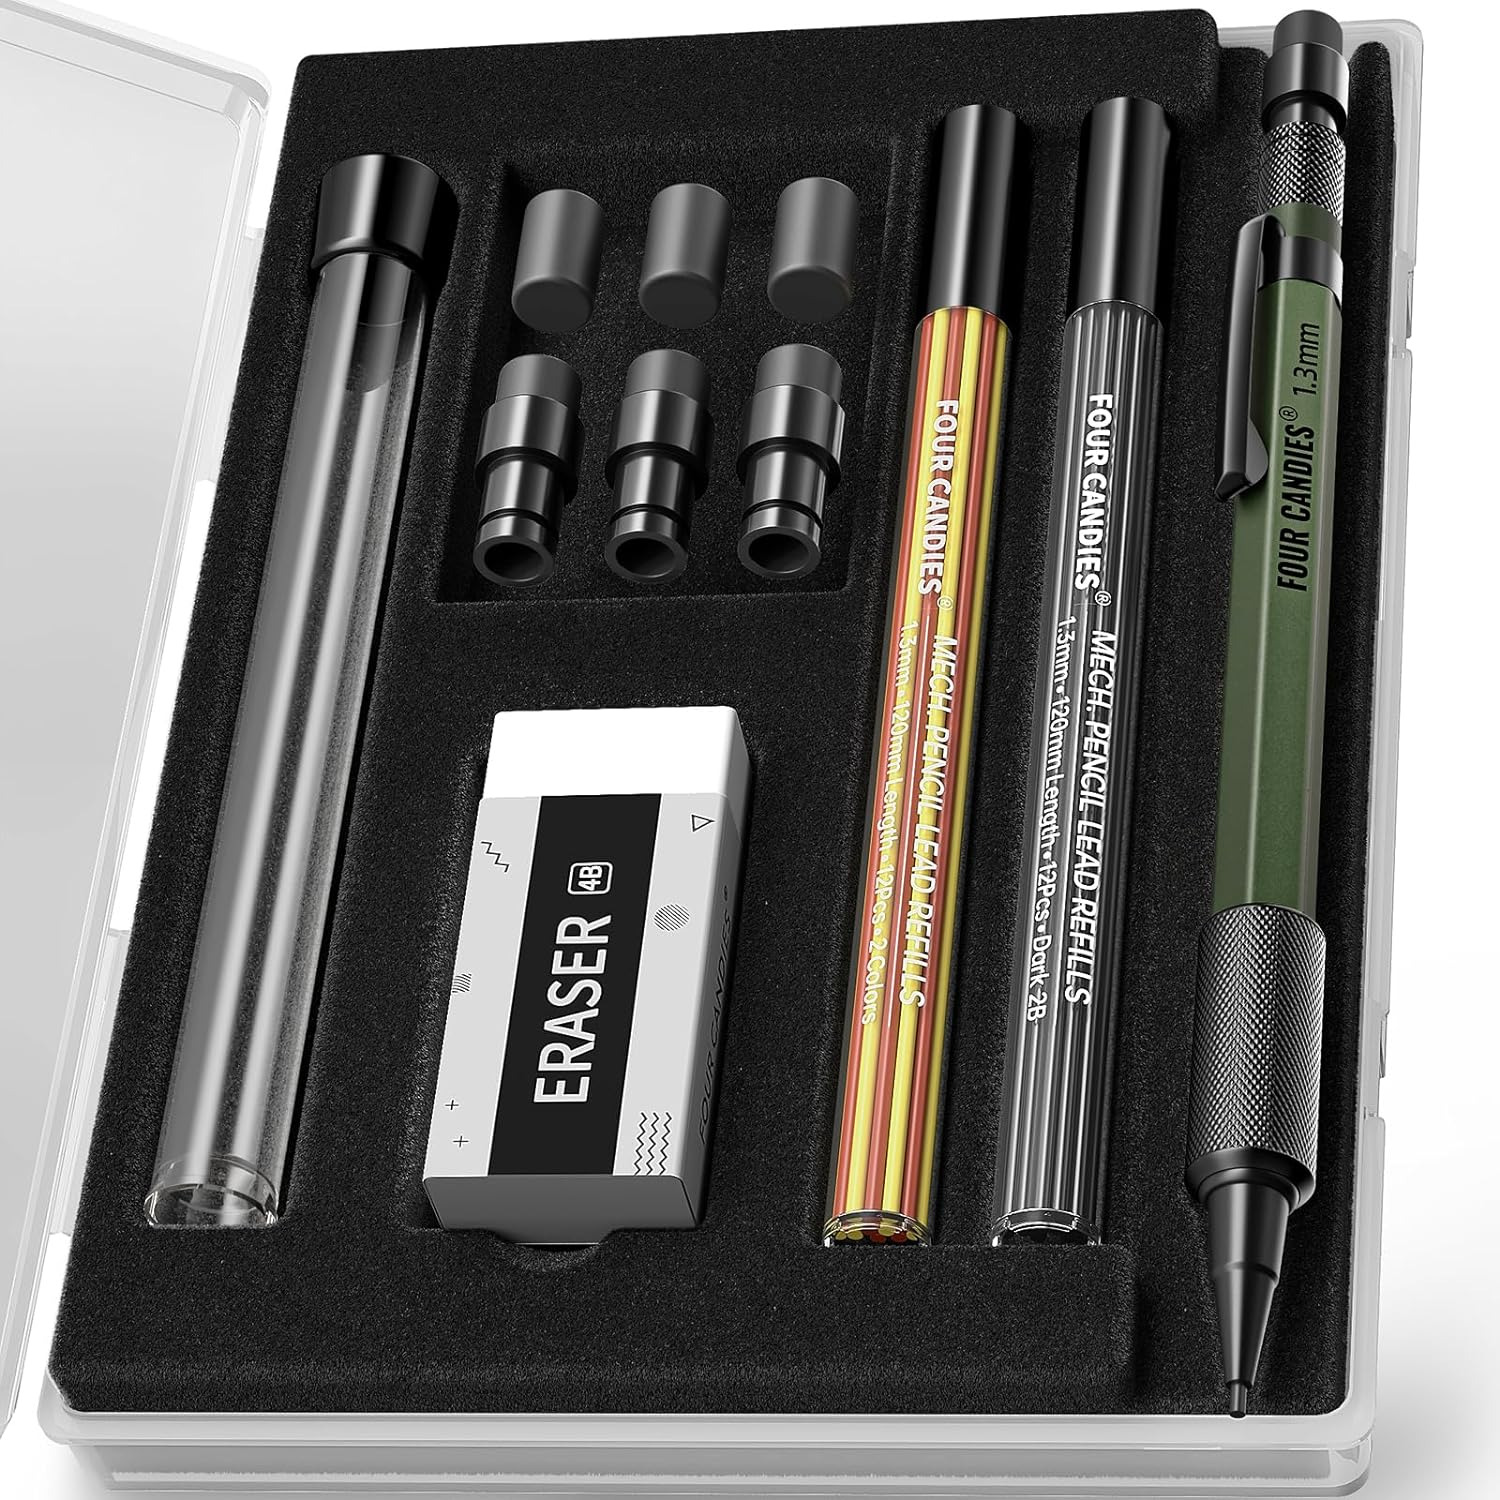 Four Candies 1.3Mm Mechanical Pencil Set with Case, Metal Heavy Duty Outdoor Car